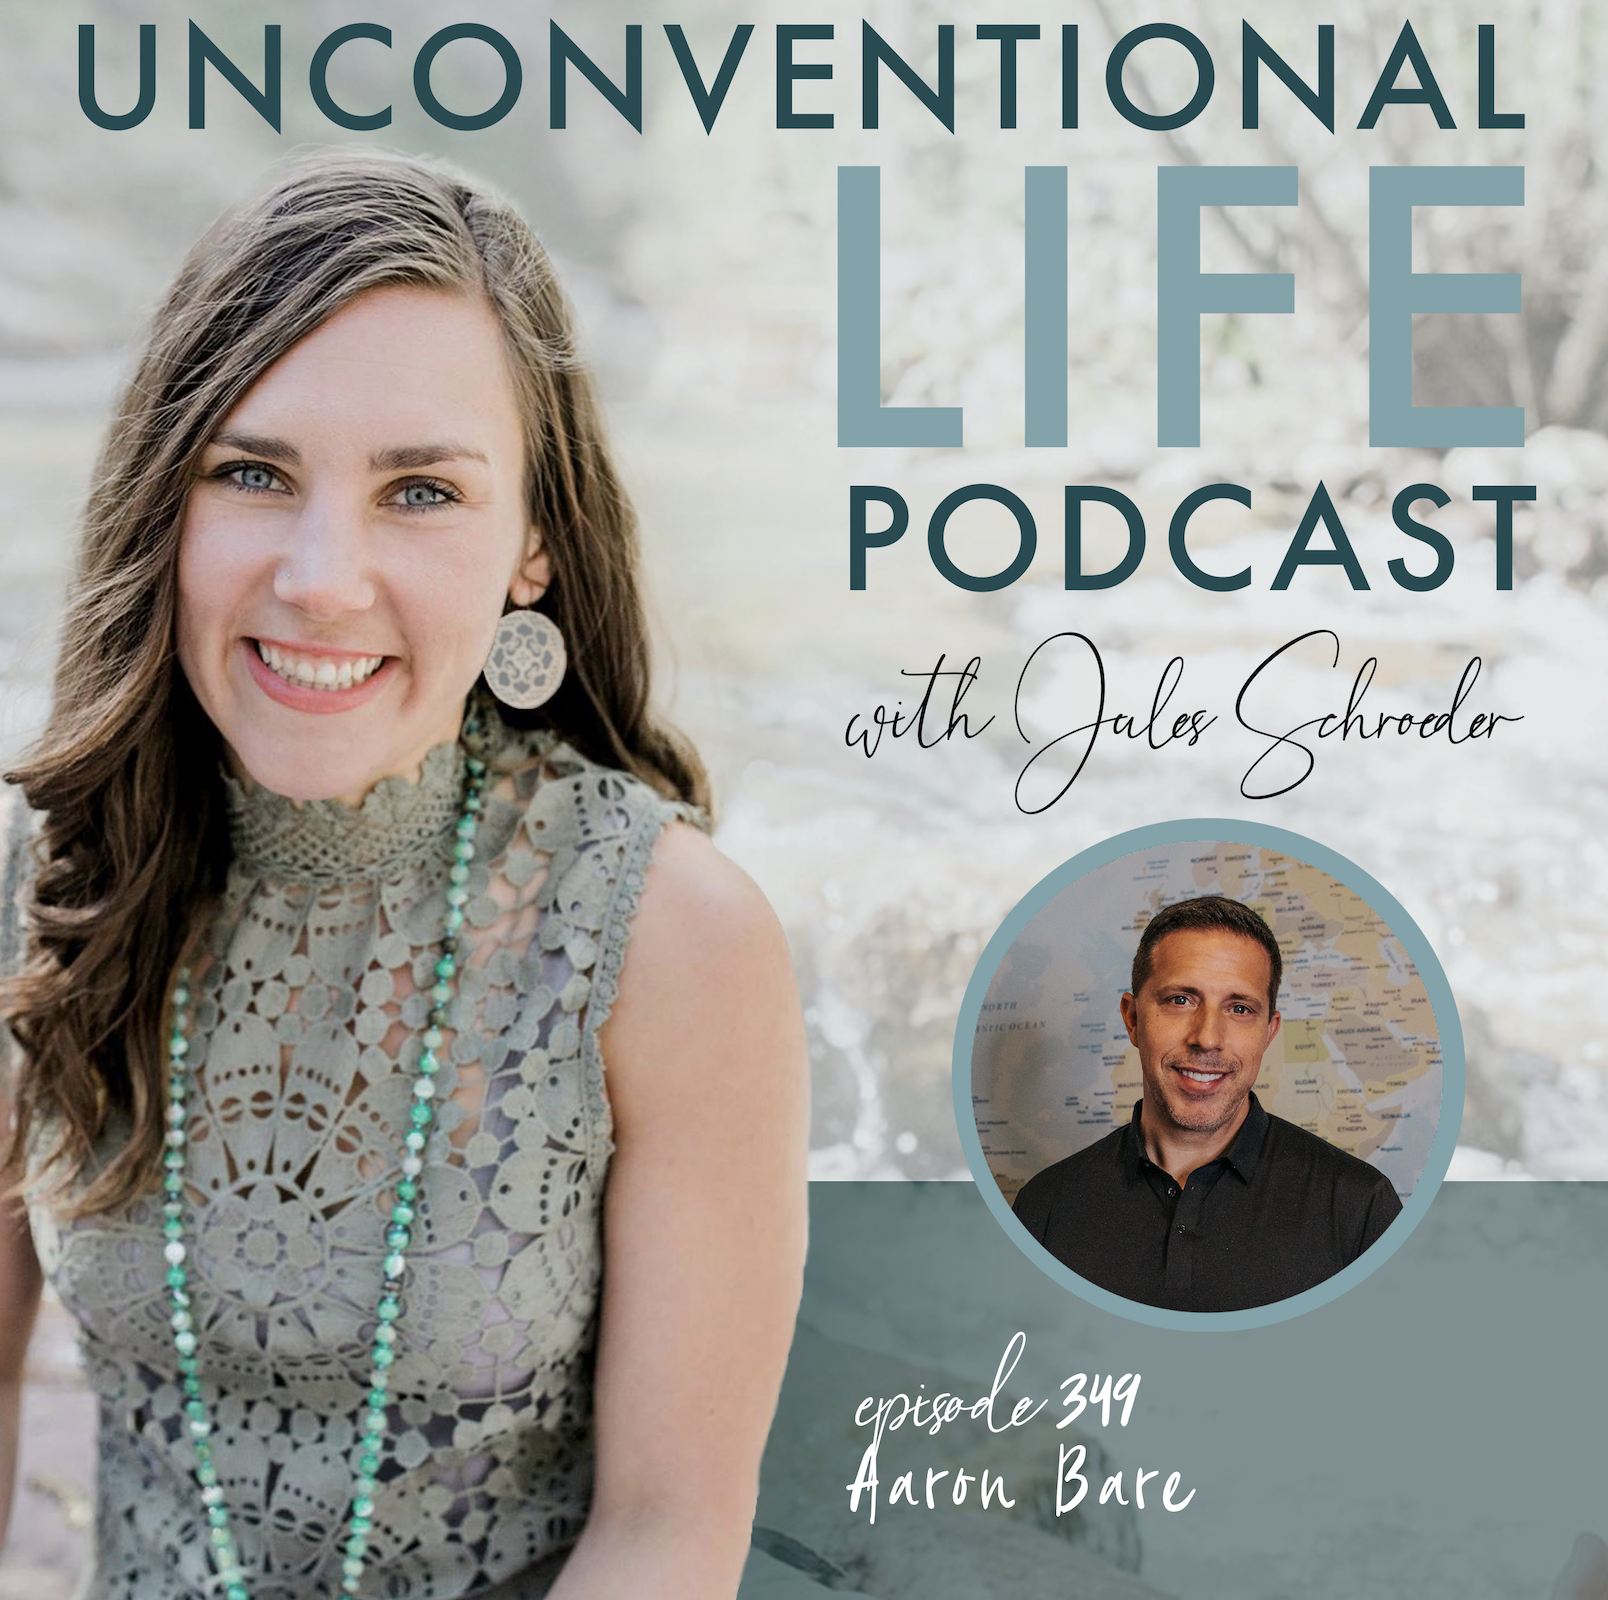 Aaron Bare on Unconventional Life Podcast